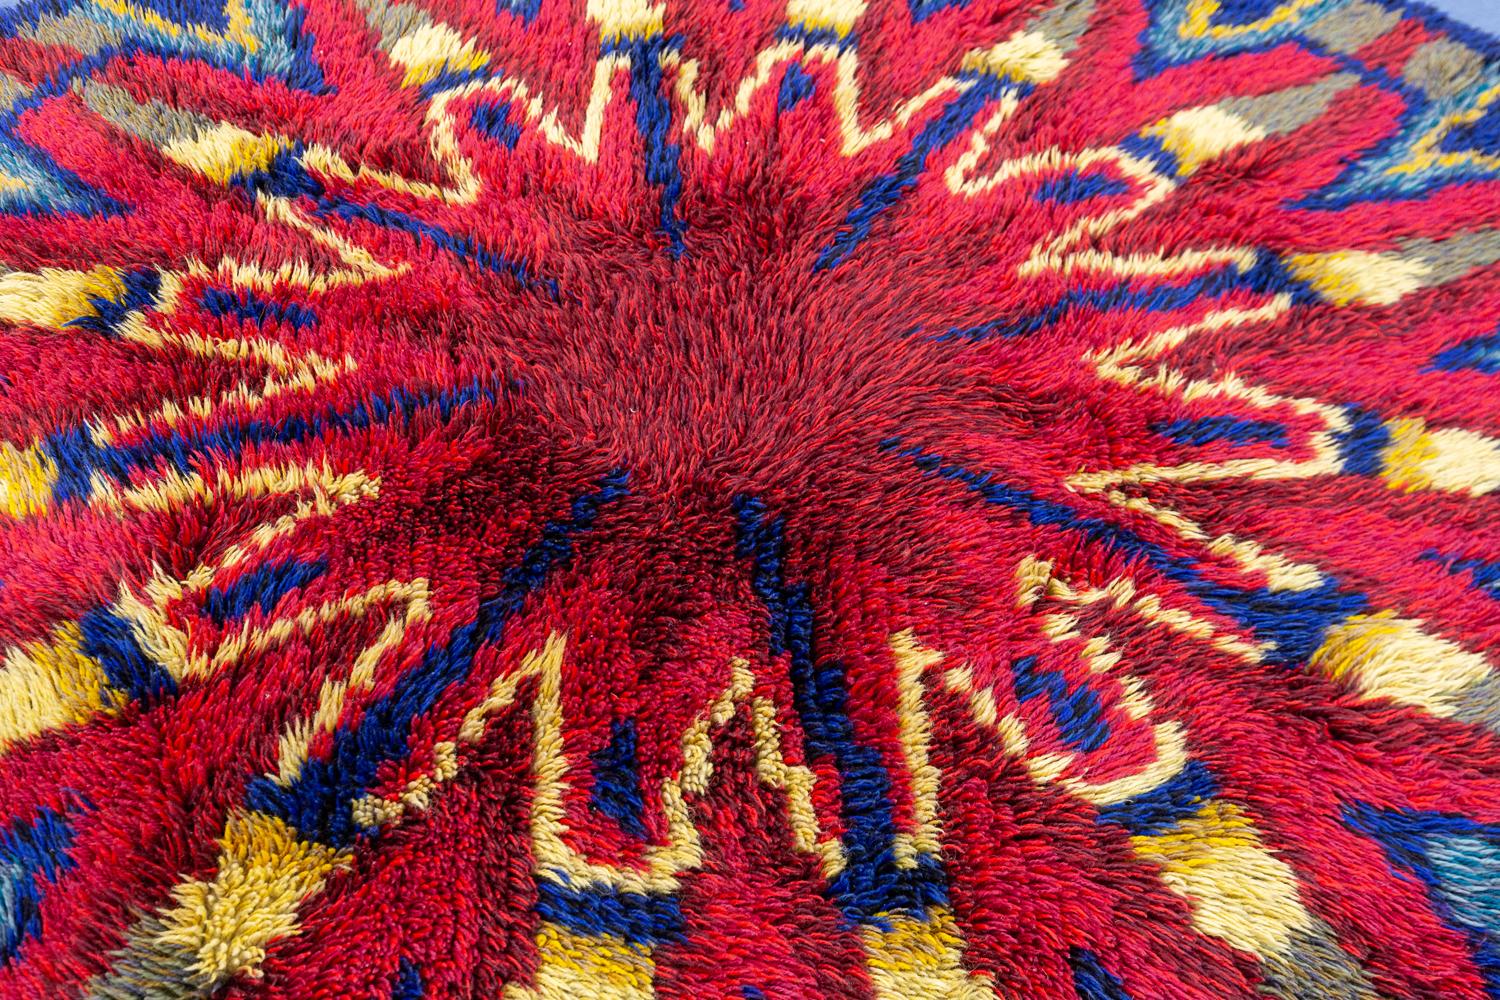 This is a round vintage “Rya” Swedish rug woven circa 1950 - 1970 and measures 173 x 173cm in size. This rug has what is known as a starburst design set on three layers giving it a unique 3D visual effect. This rug has been handwoven and retains its